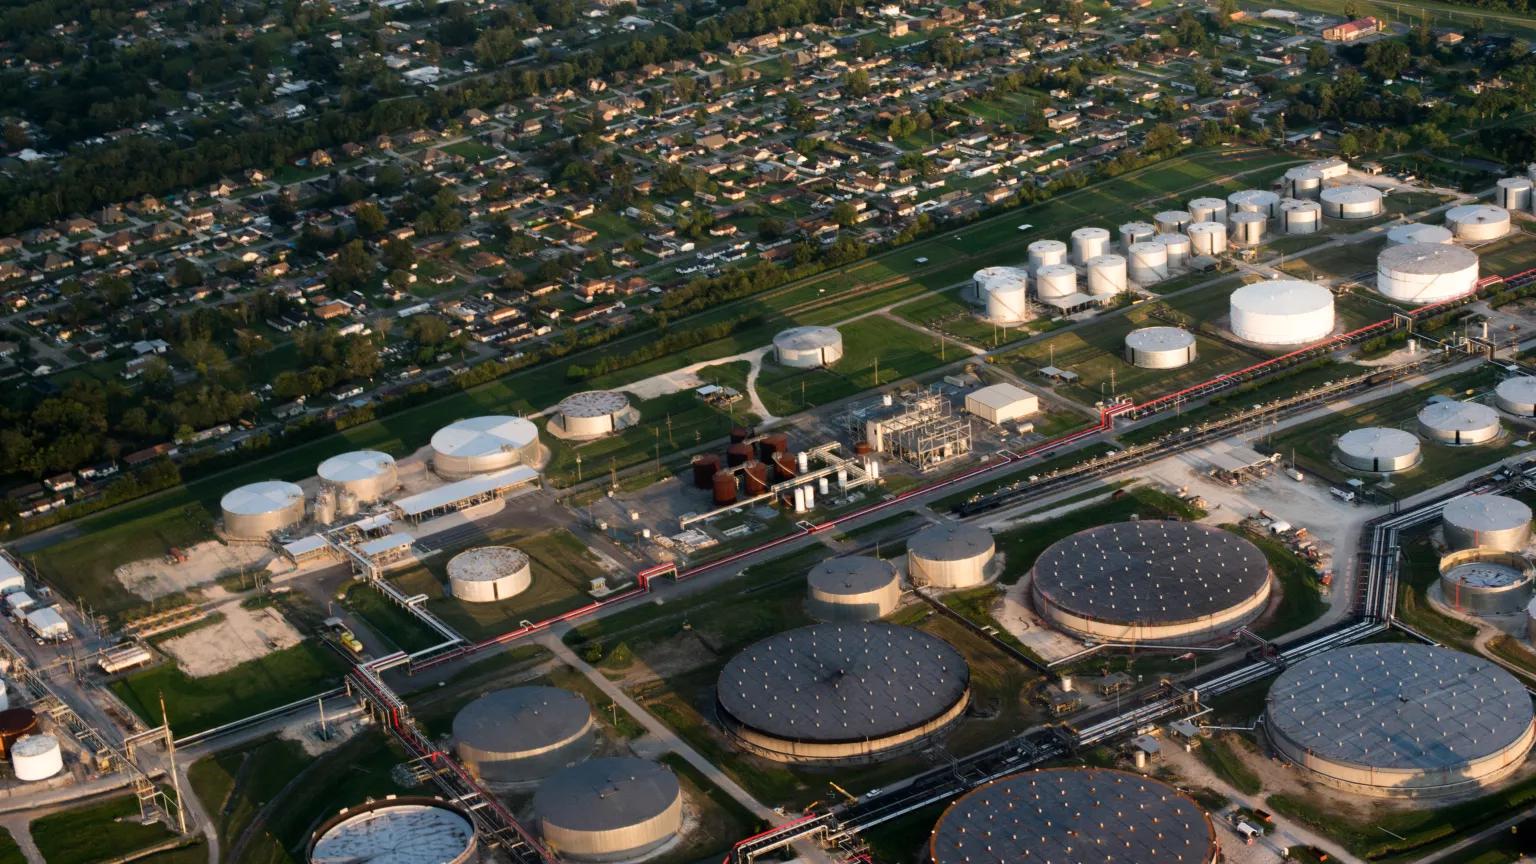 An aerial view of chemical plants in Baton Rouge, Louisiana